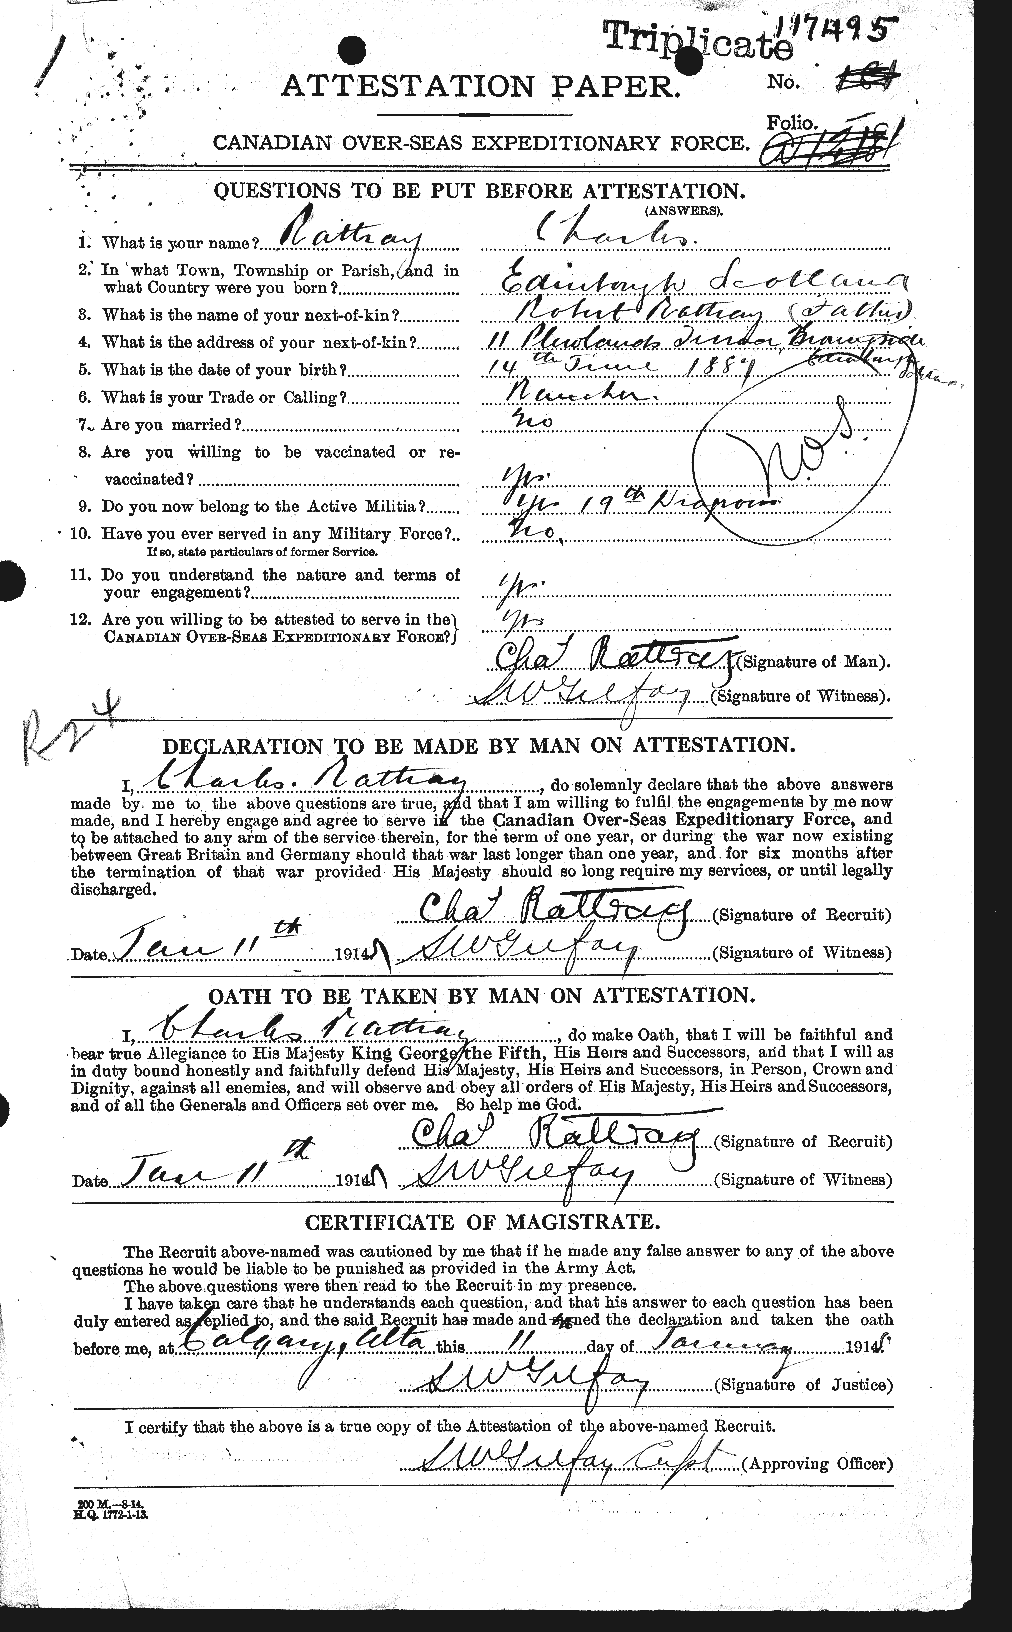 Personnel Records of the First World War - CEF 595694a